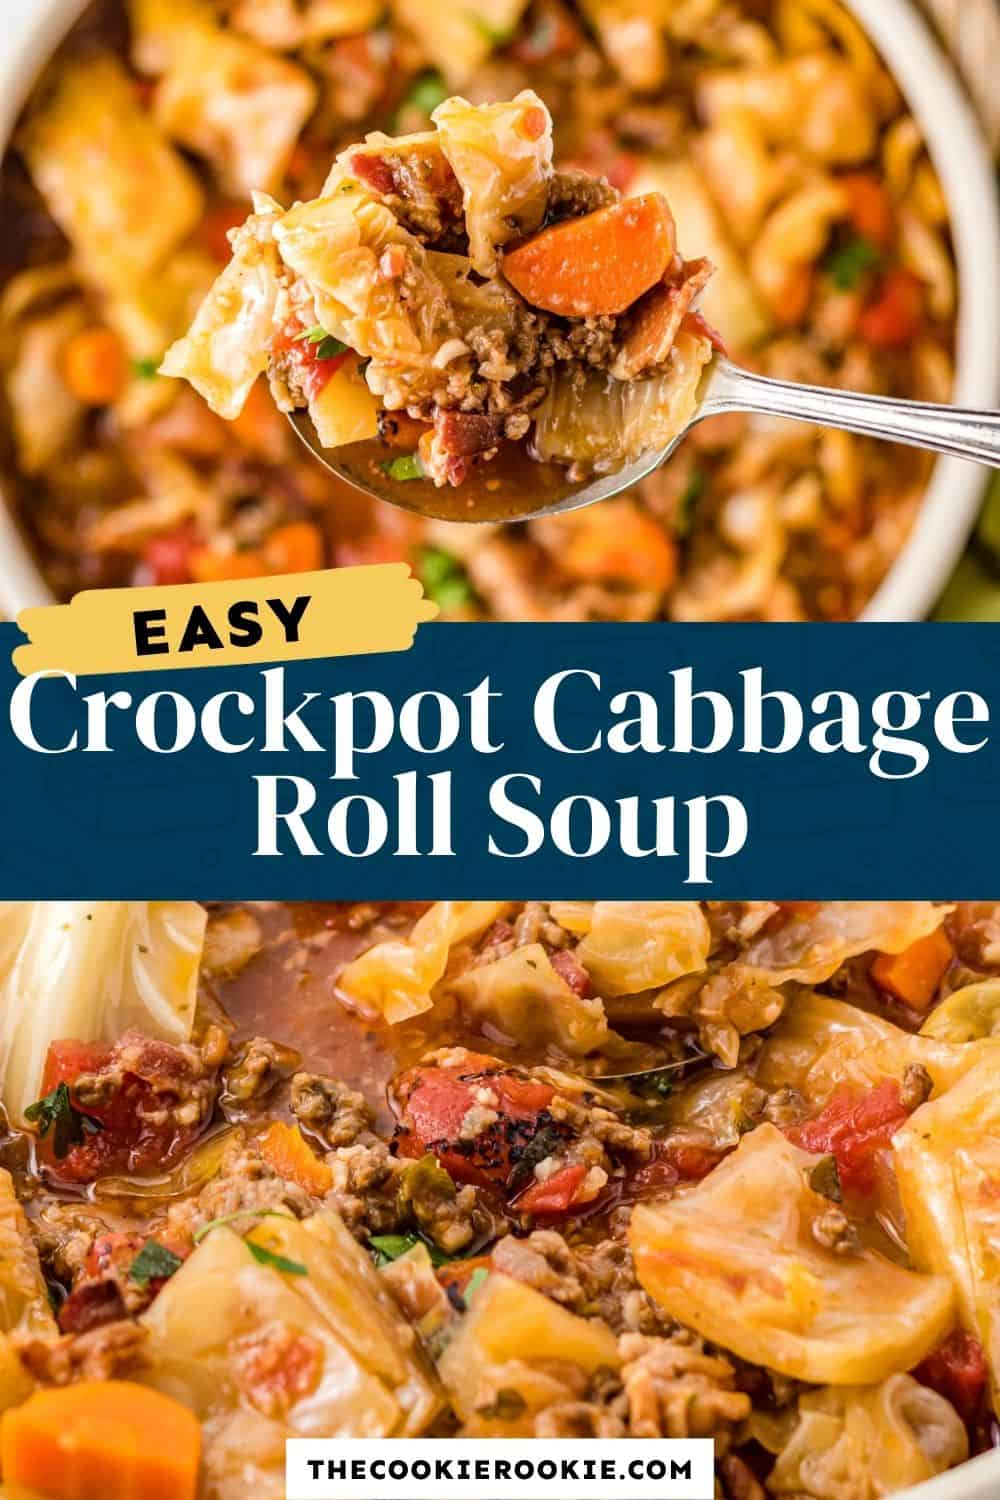 Crockpot Cabbage Roll Soup Recipe - The Cookie Rookie®